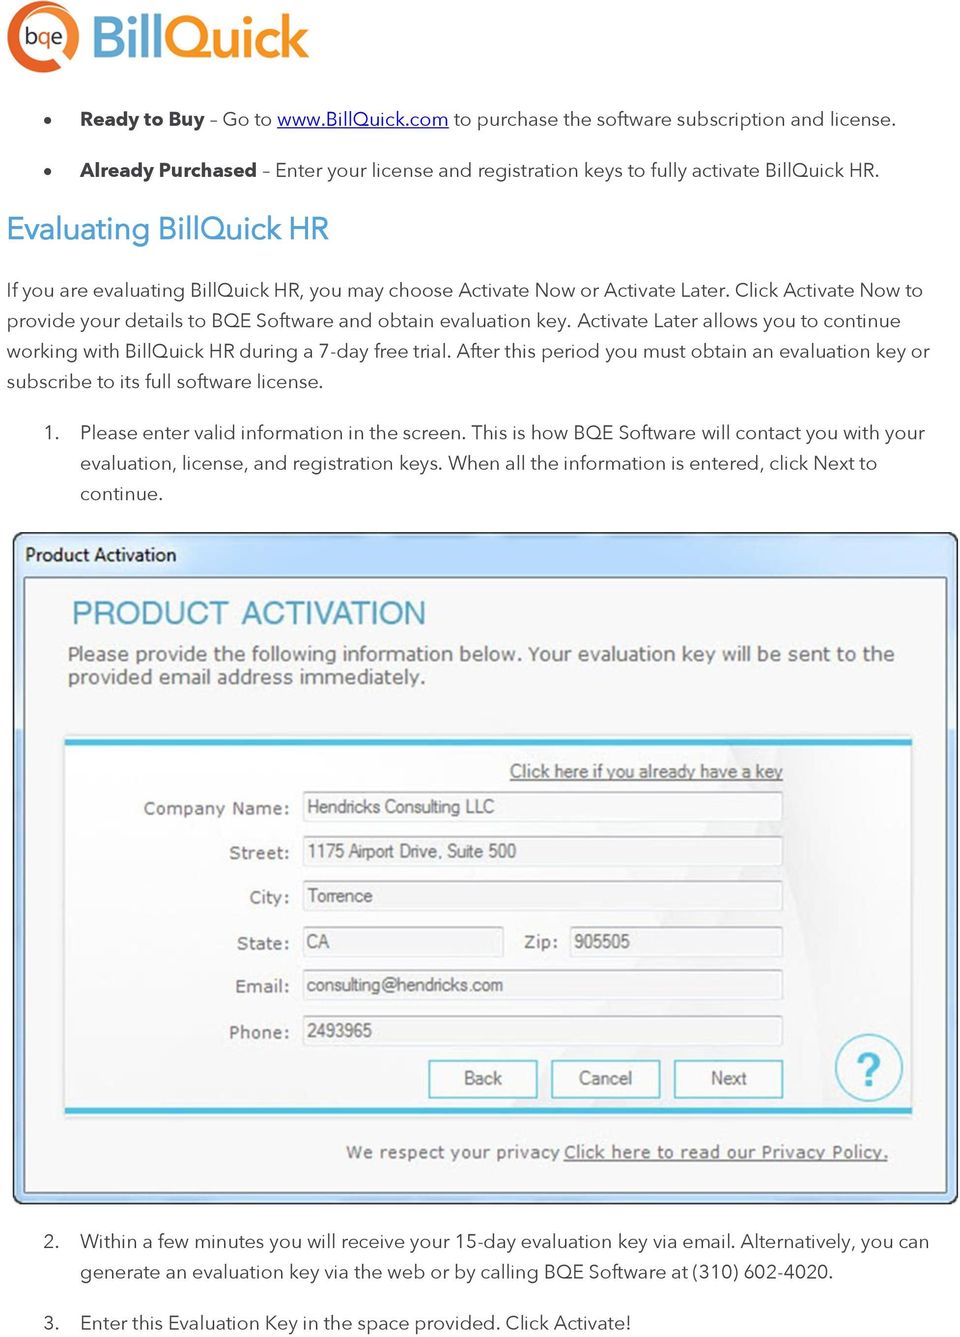 Activate Later allows you to continue working with BillQuick HR during a 7-day free trial. After this period you must obtain an evaluation key or subscribe to its full software license. 1.